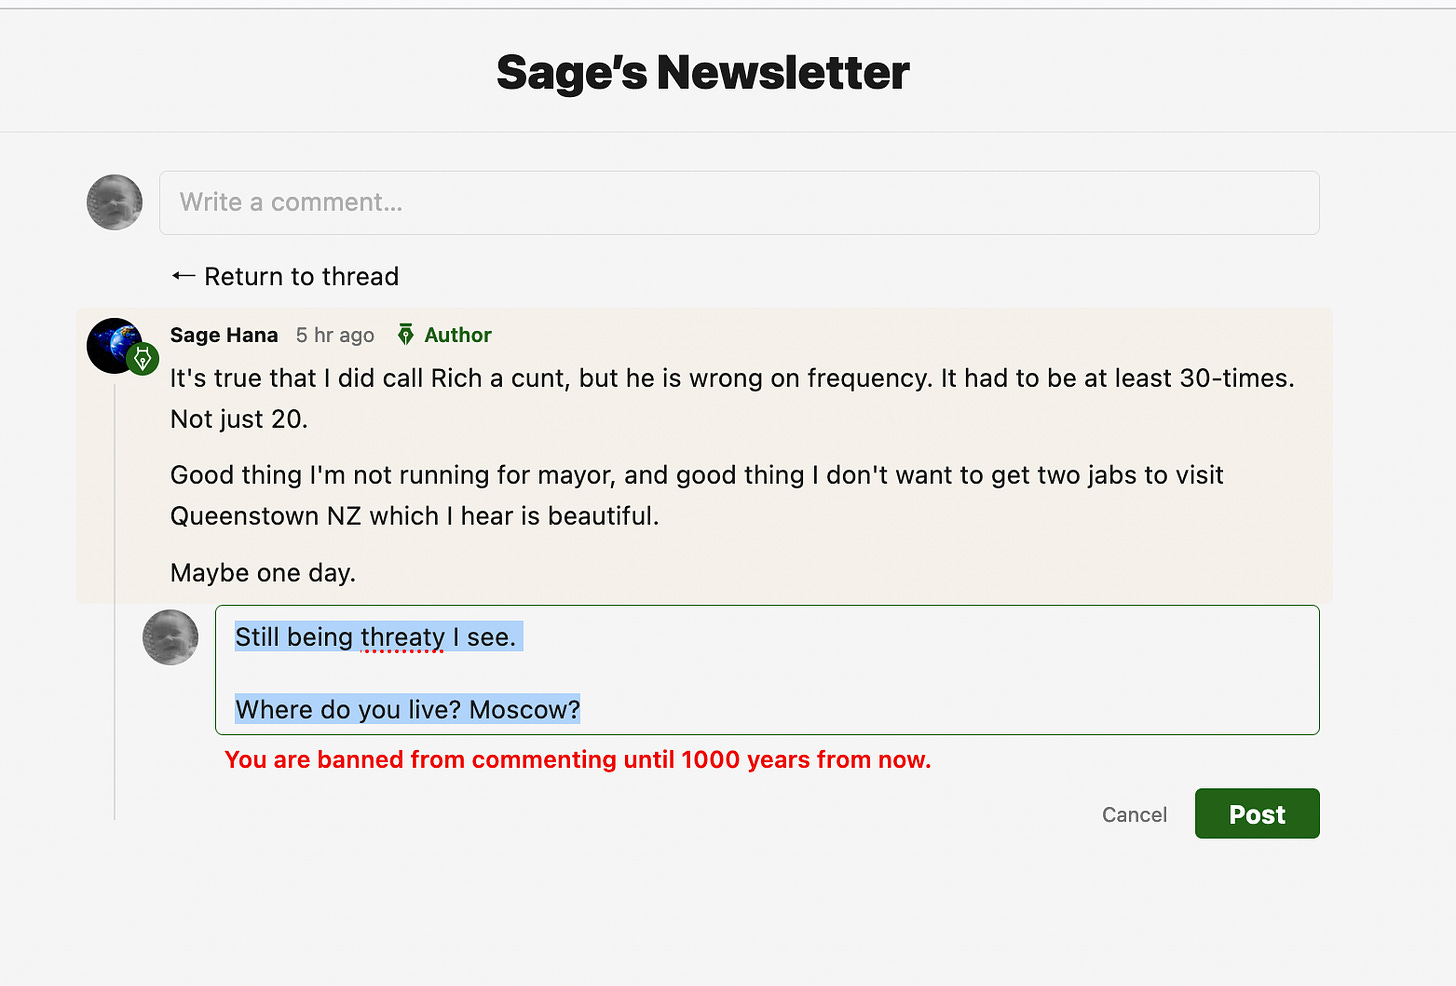 Sage bans me for 1000 years